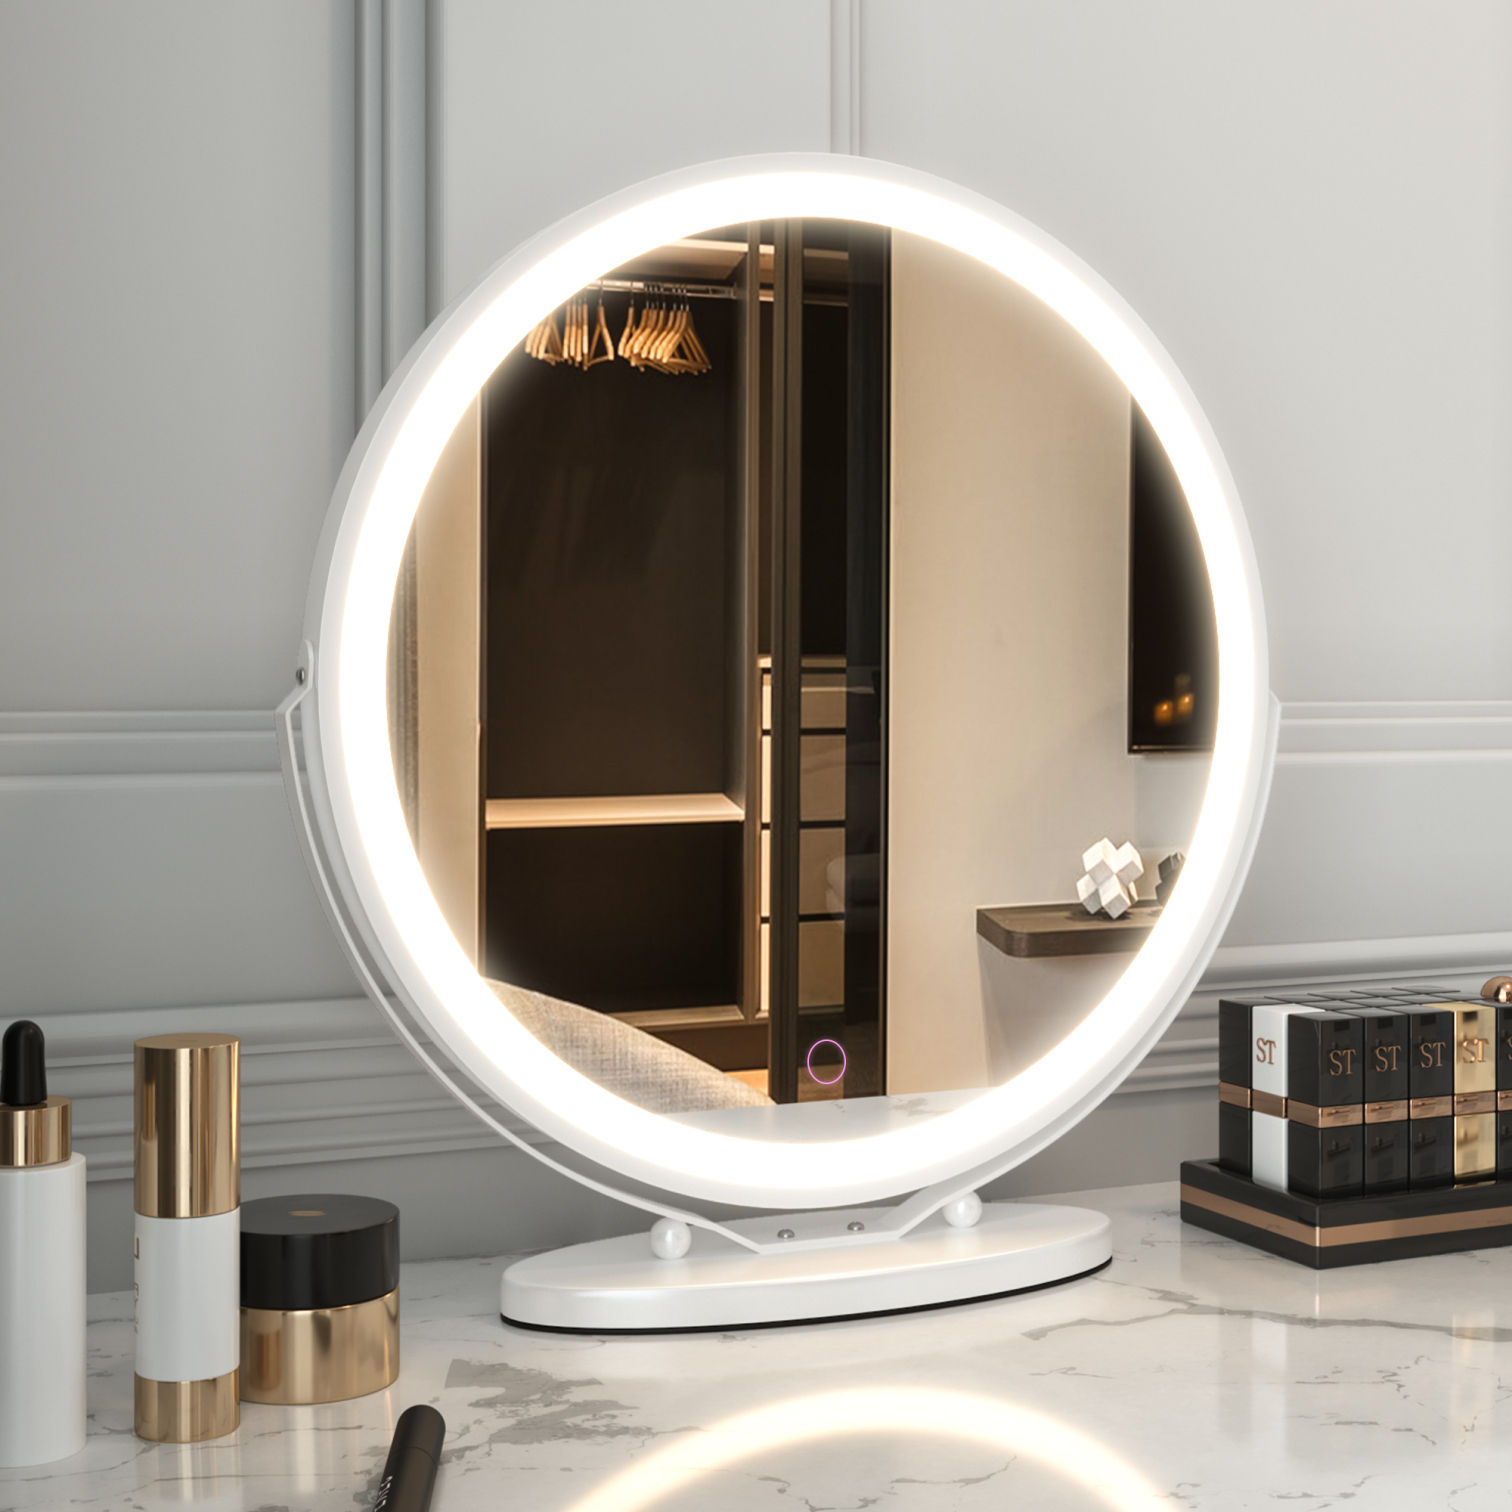 LVSOMT Smart Touch Cosmetic Mirror